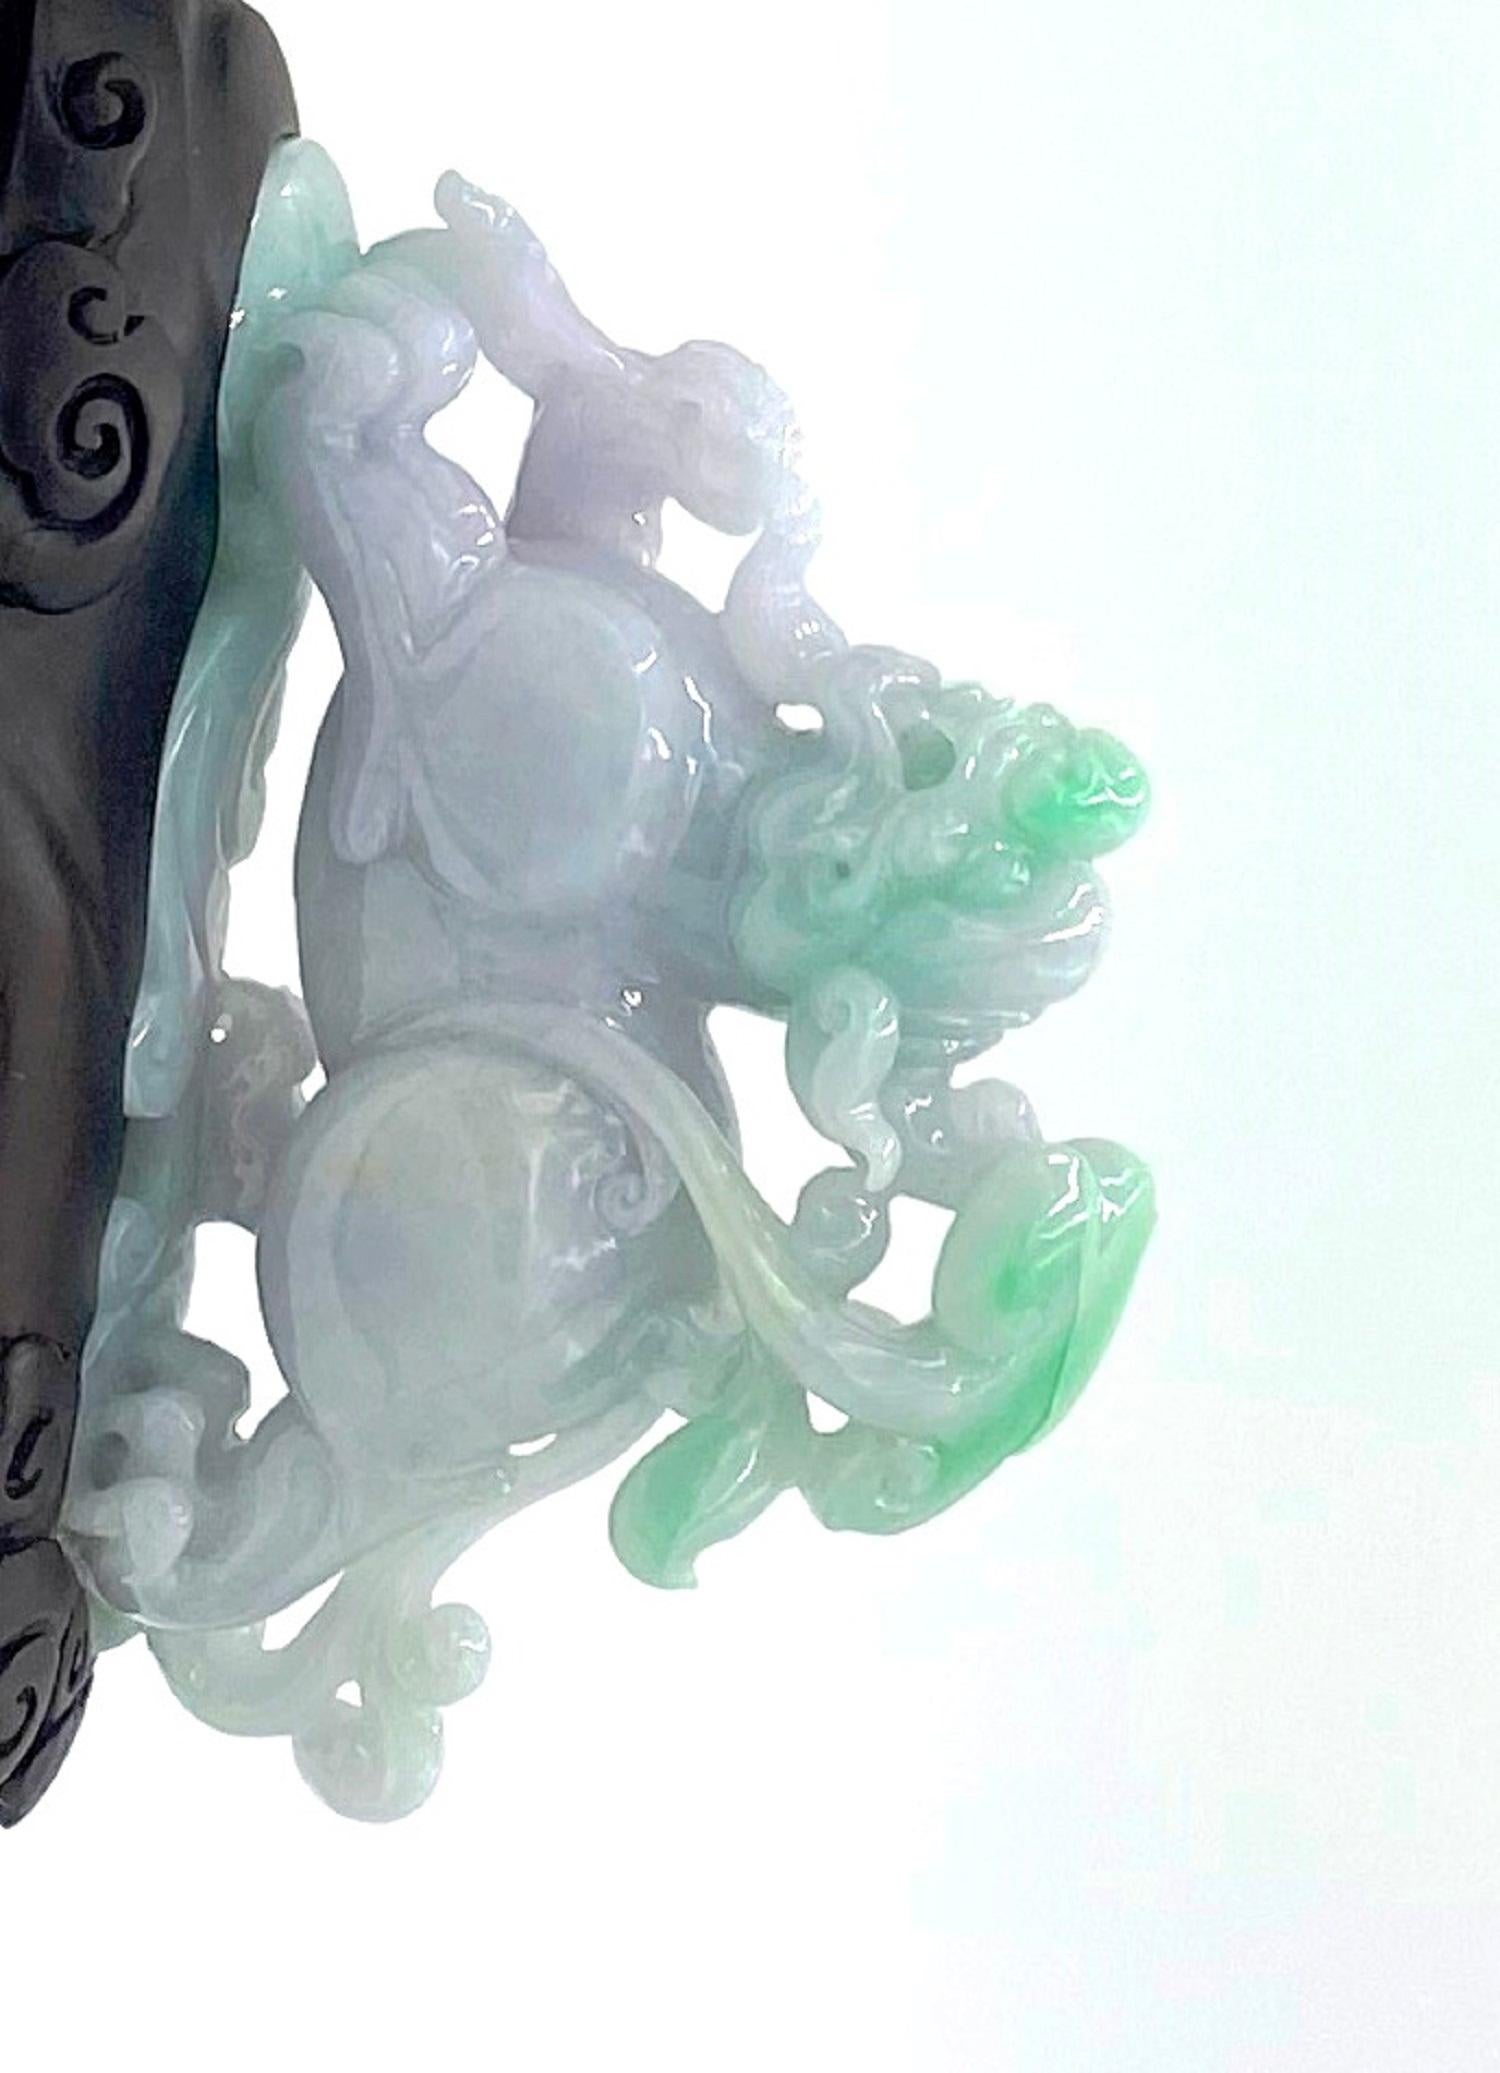 JD1317 
An exceptional Jadeite Jade carving with natural colors of Lavander, Light green and white Buddha statue, guarded by a Chinese Lion, decorated front and back on a custom made wood stand.  A passionate piece of traditional Buddhist Chinese